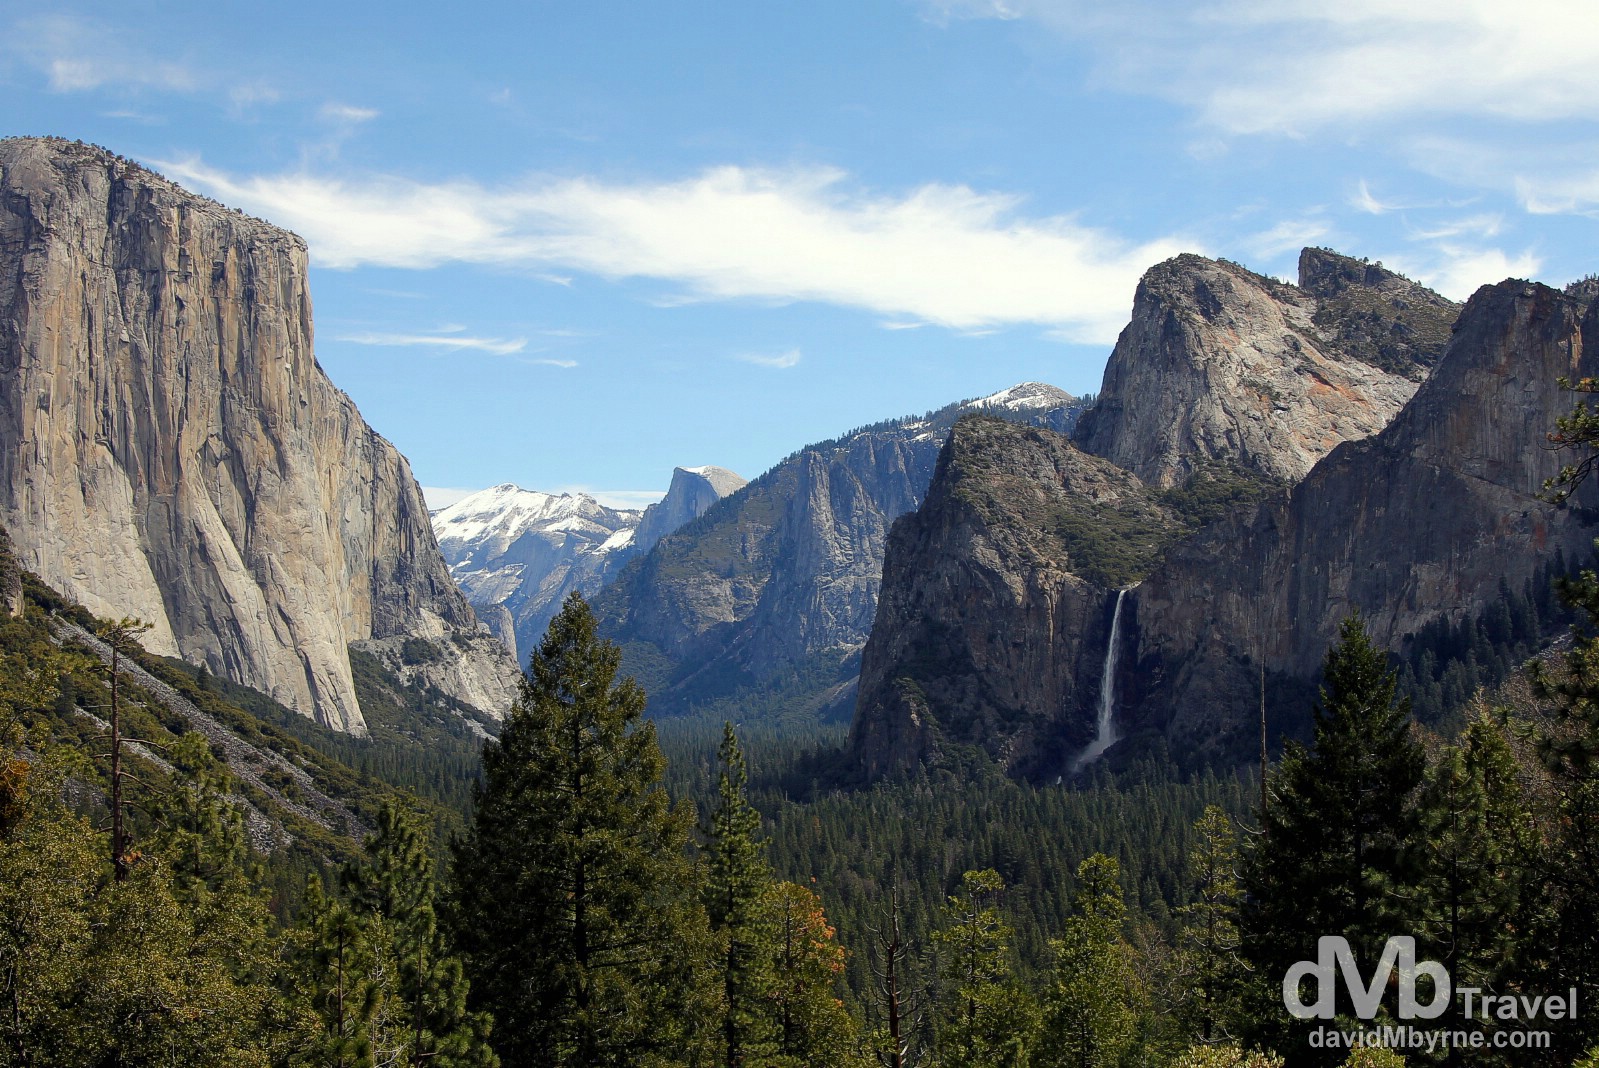 Yosemite Valley as seen from Tunnel View. Yosemite National Park, California, USA. April 2nd 2013.